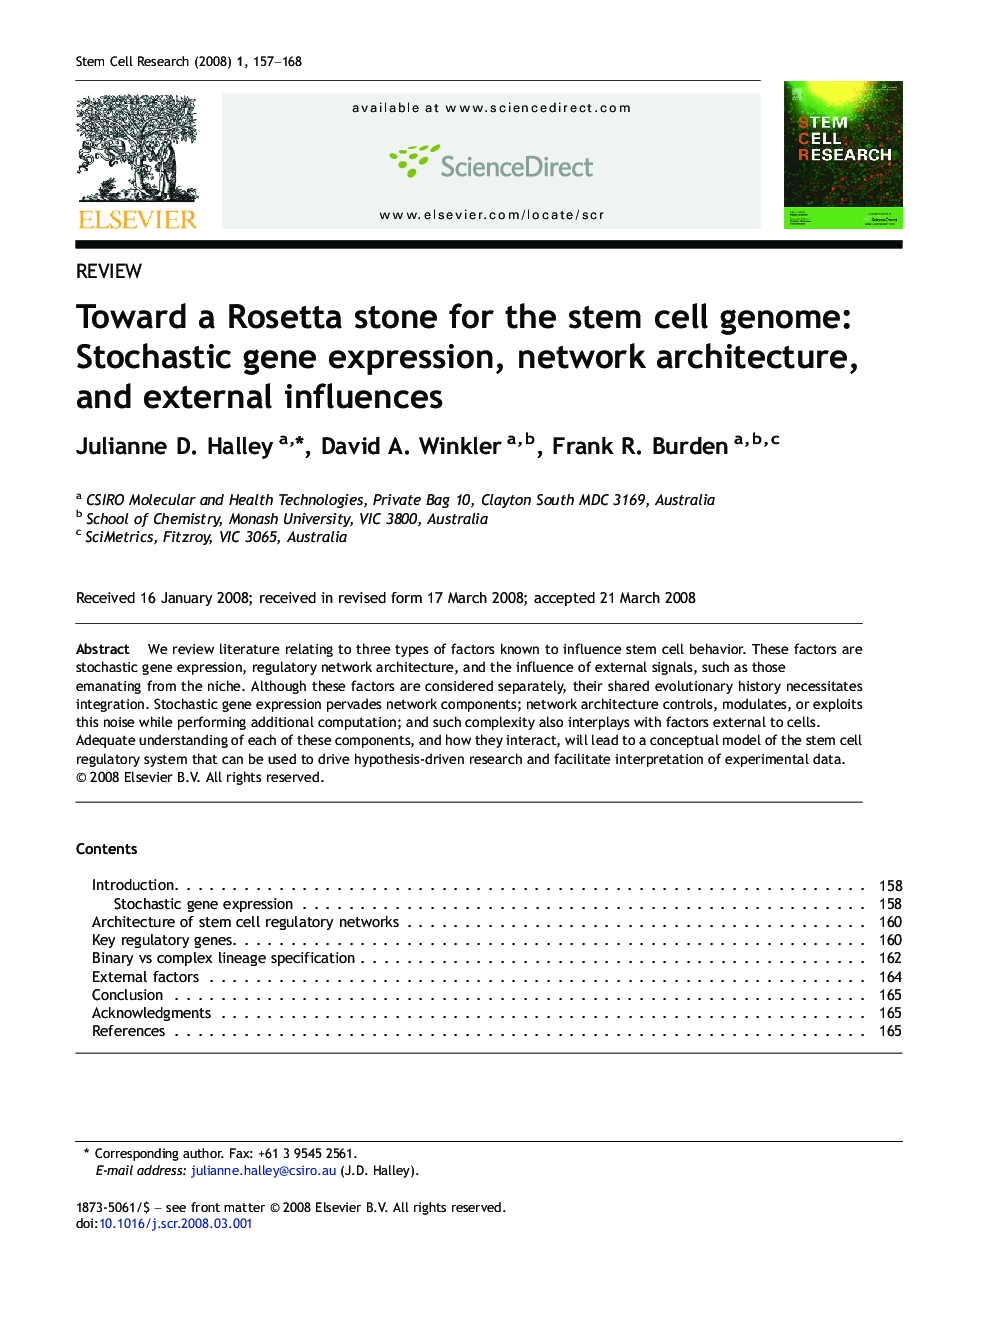 Toward a Rosetta stone for the stem cell genome: Stochastic gene expression, network architecture, and external influences